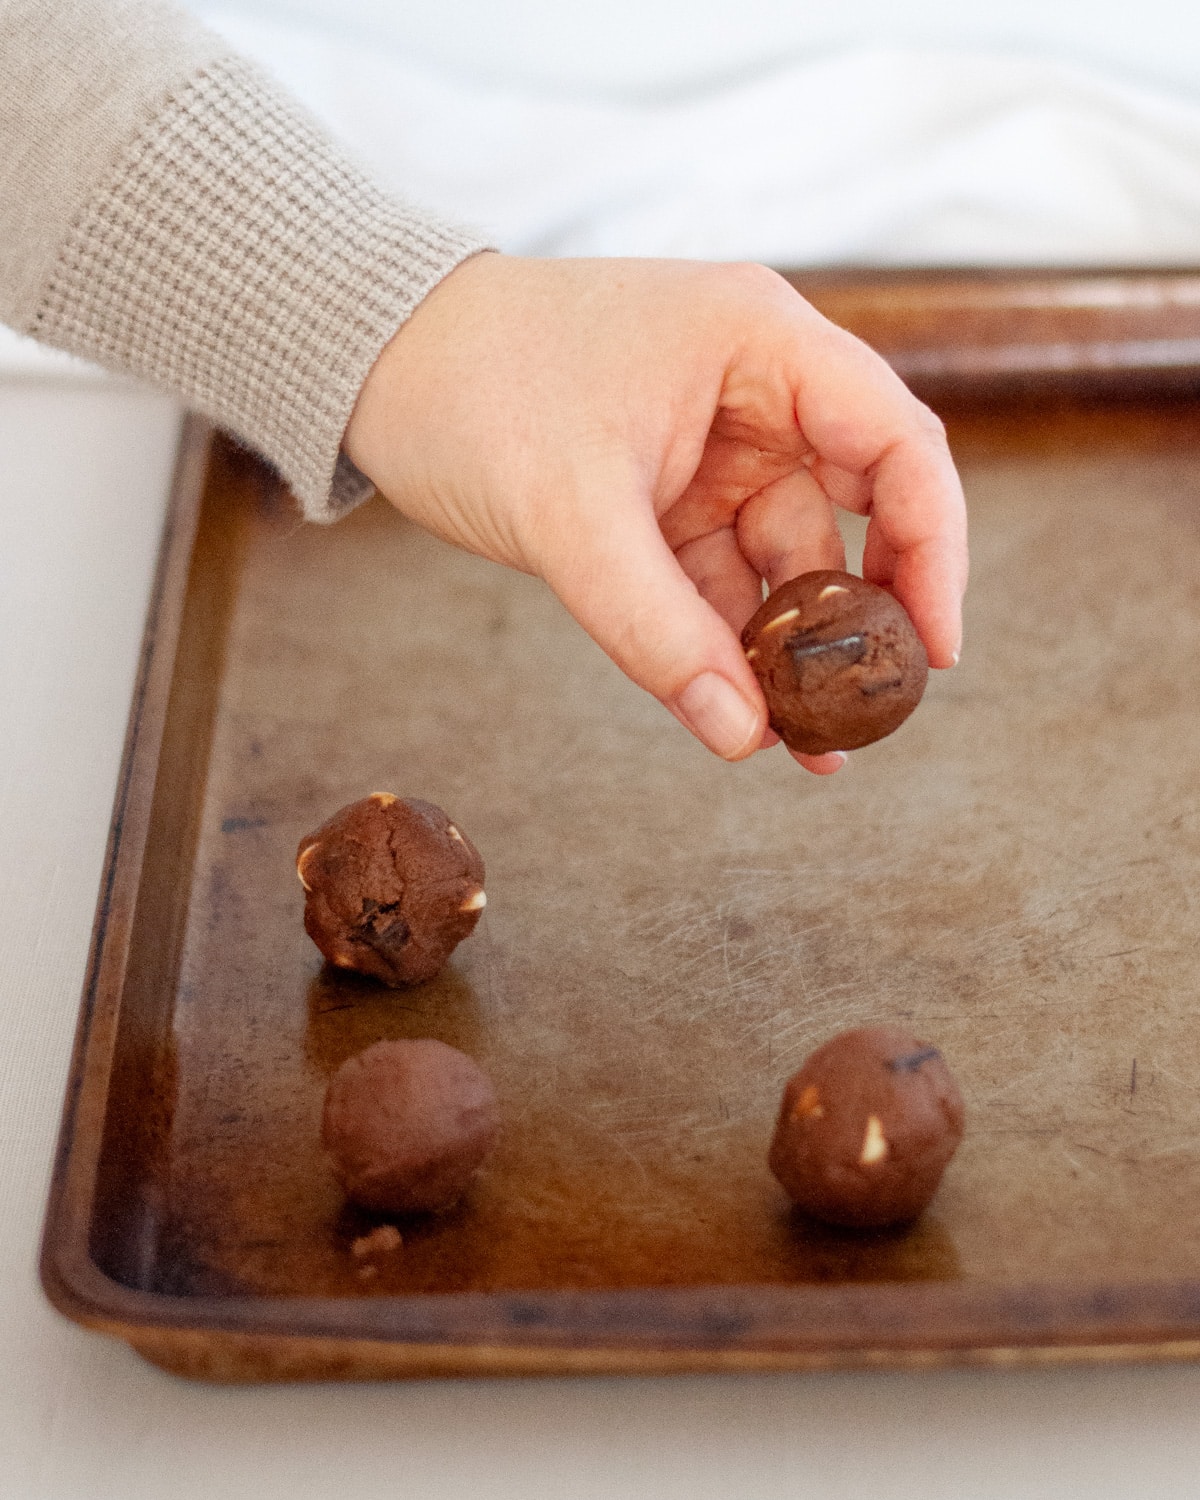 a hand placing a freshly rolled dough ball onto a baking tray.